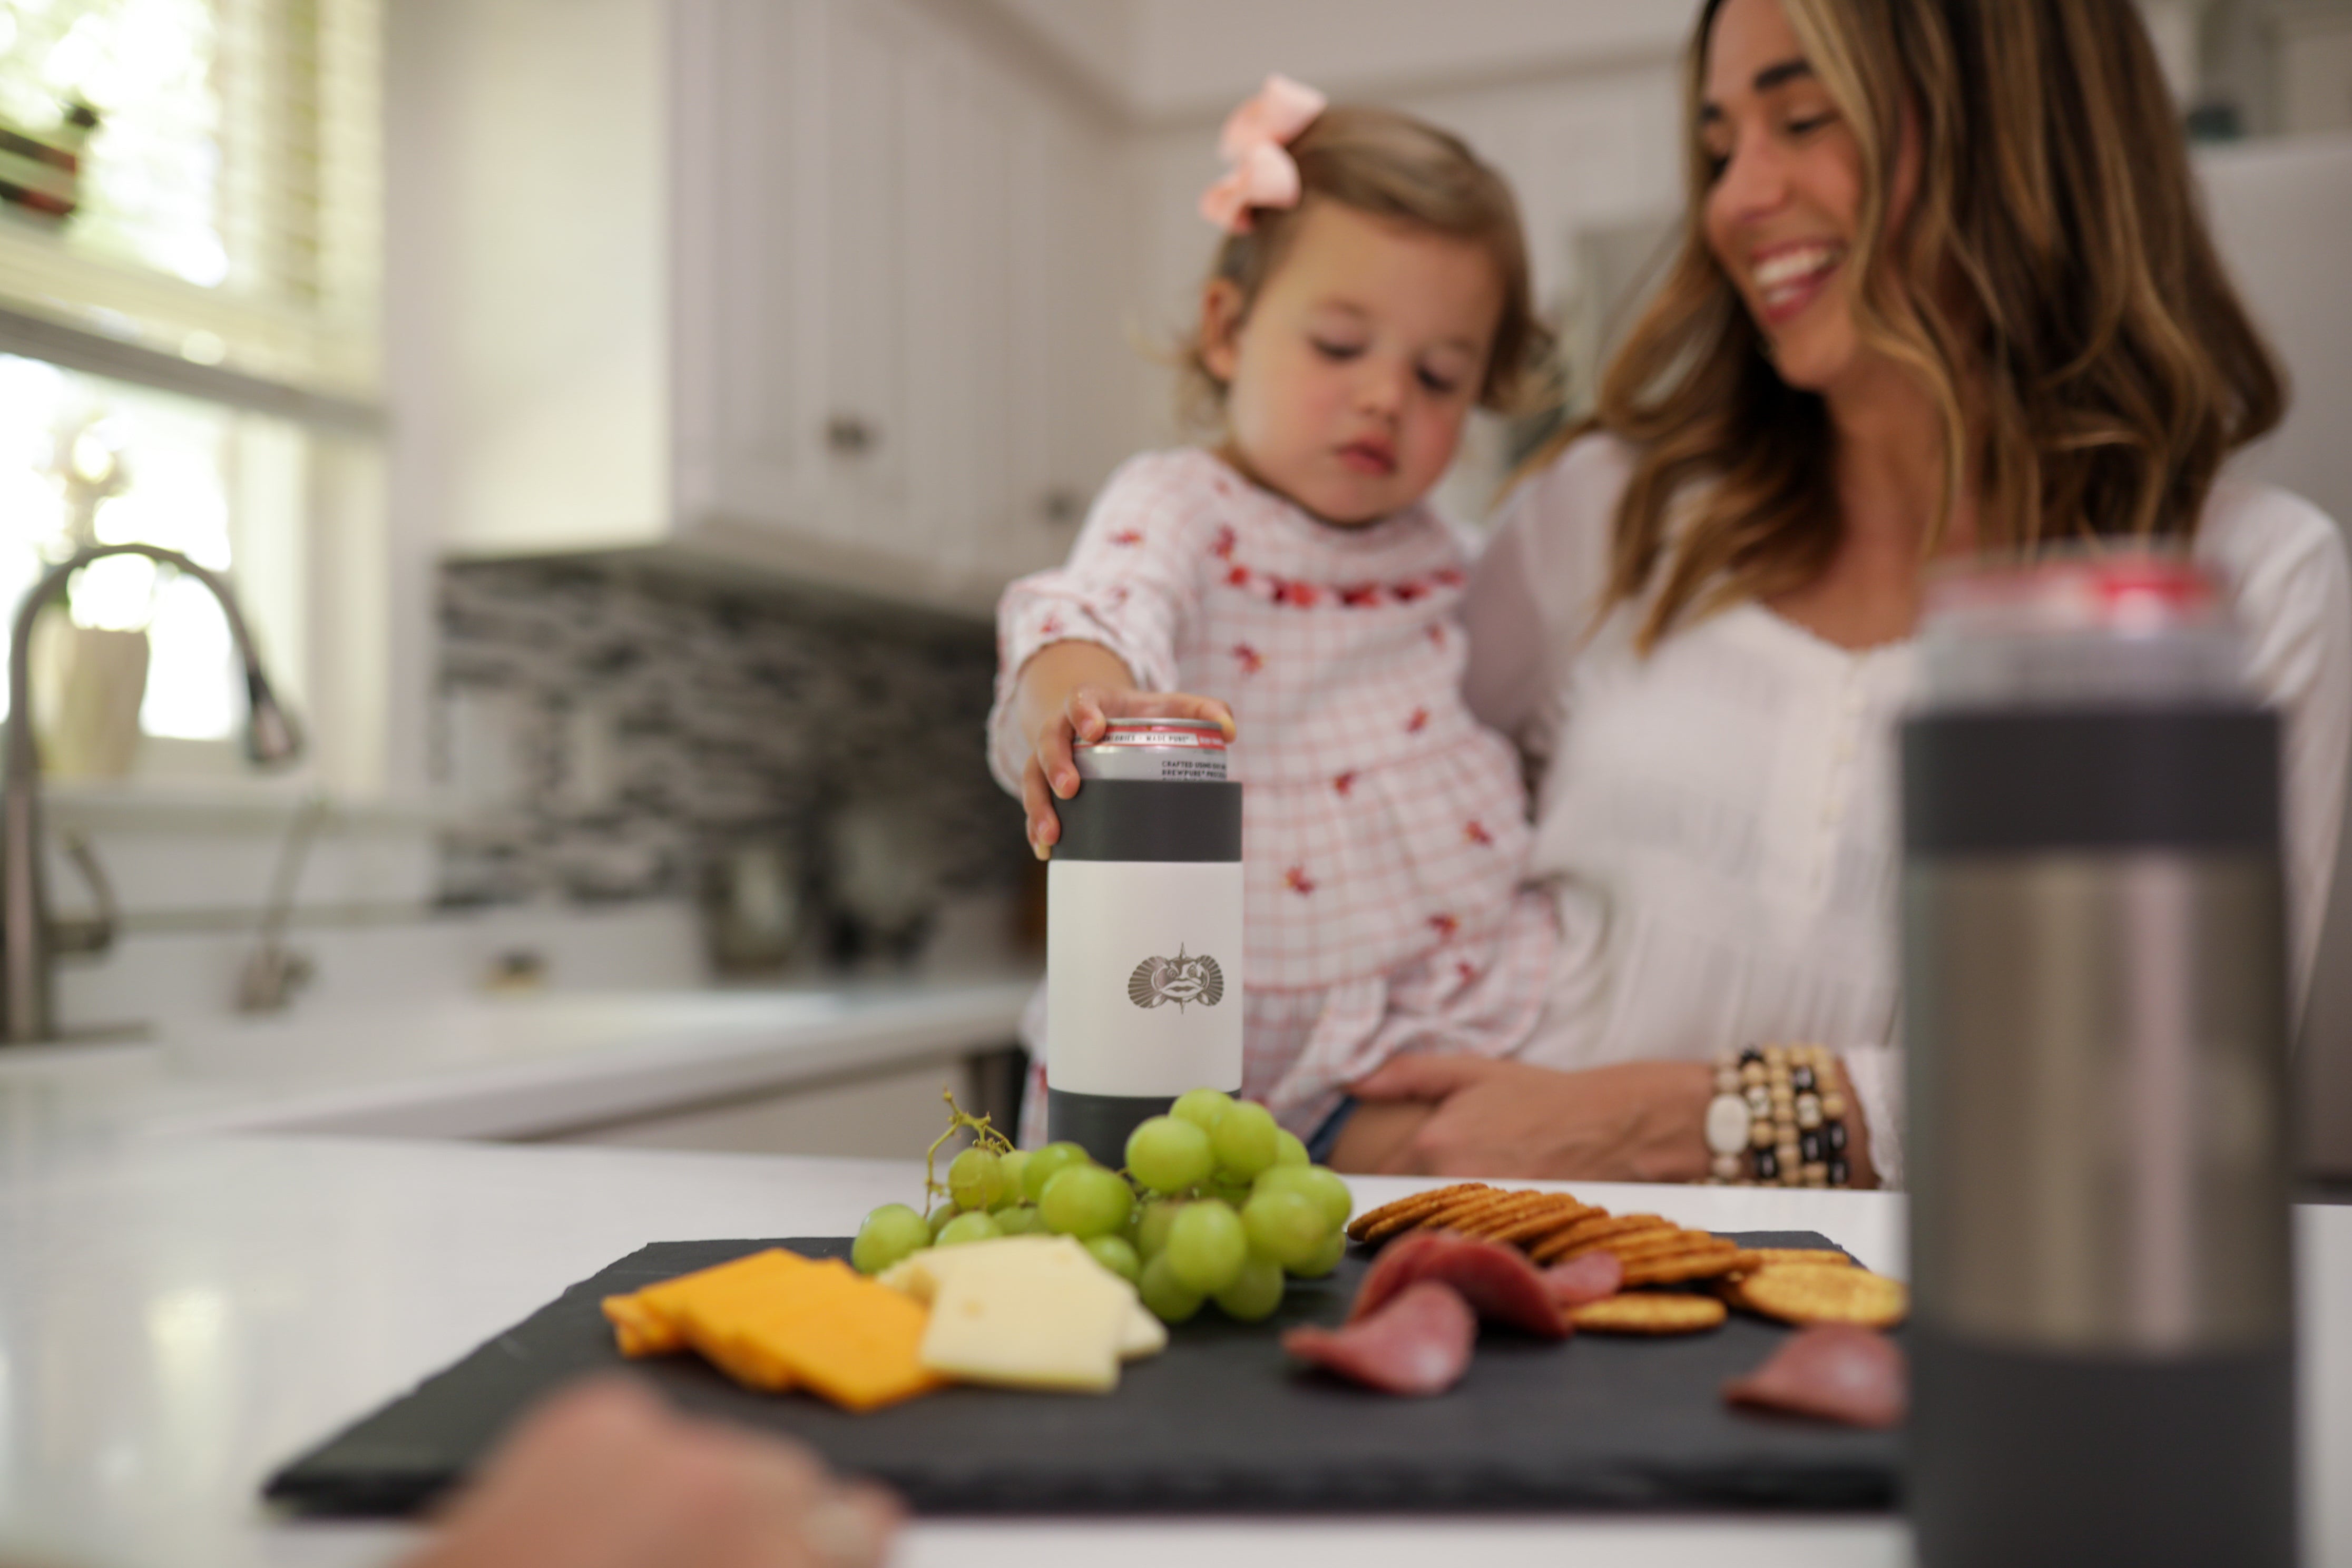 Mother's day, mom holding a baby while baby grabs for cup on countertop with food on it